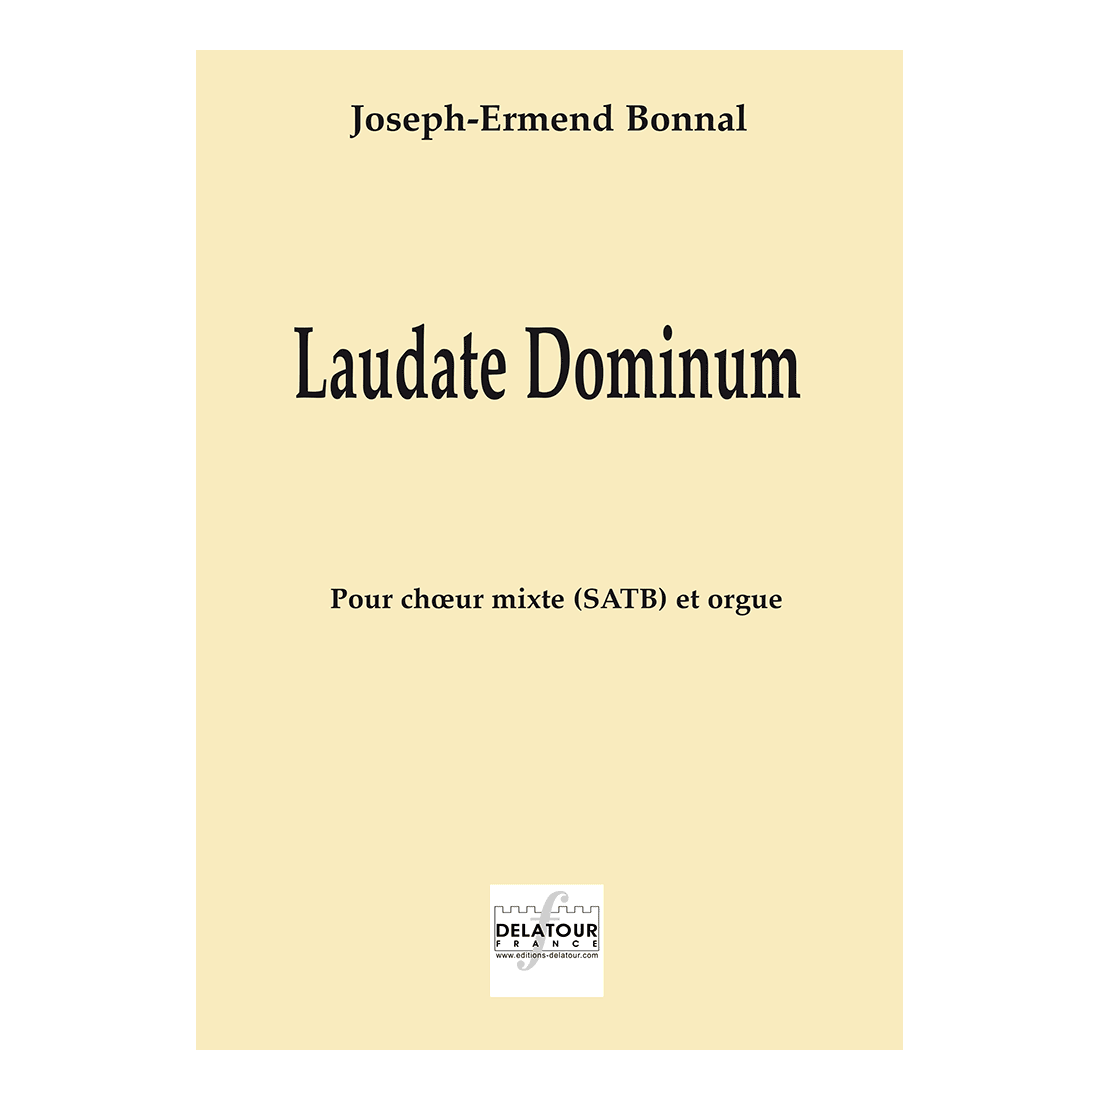 Laudate dominum for mixed choir and organ